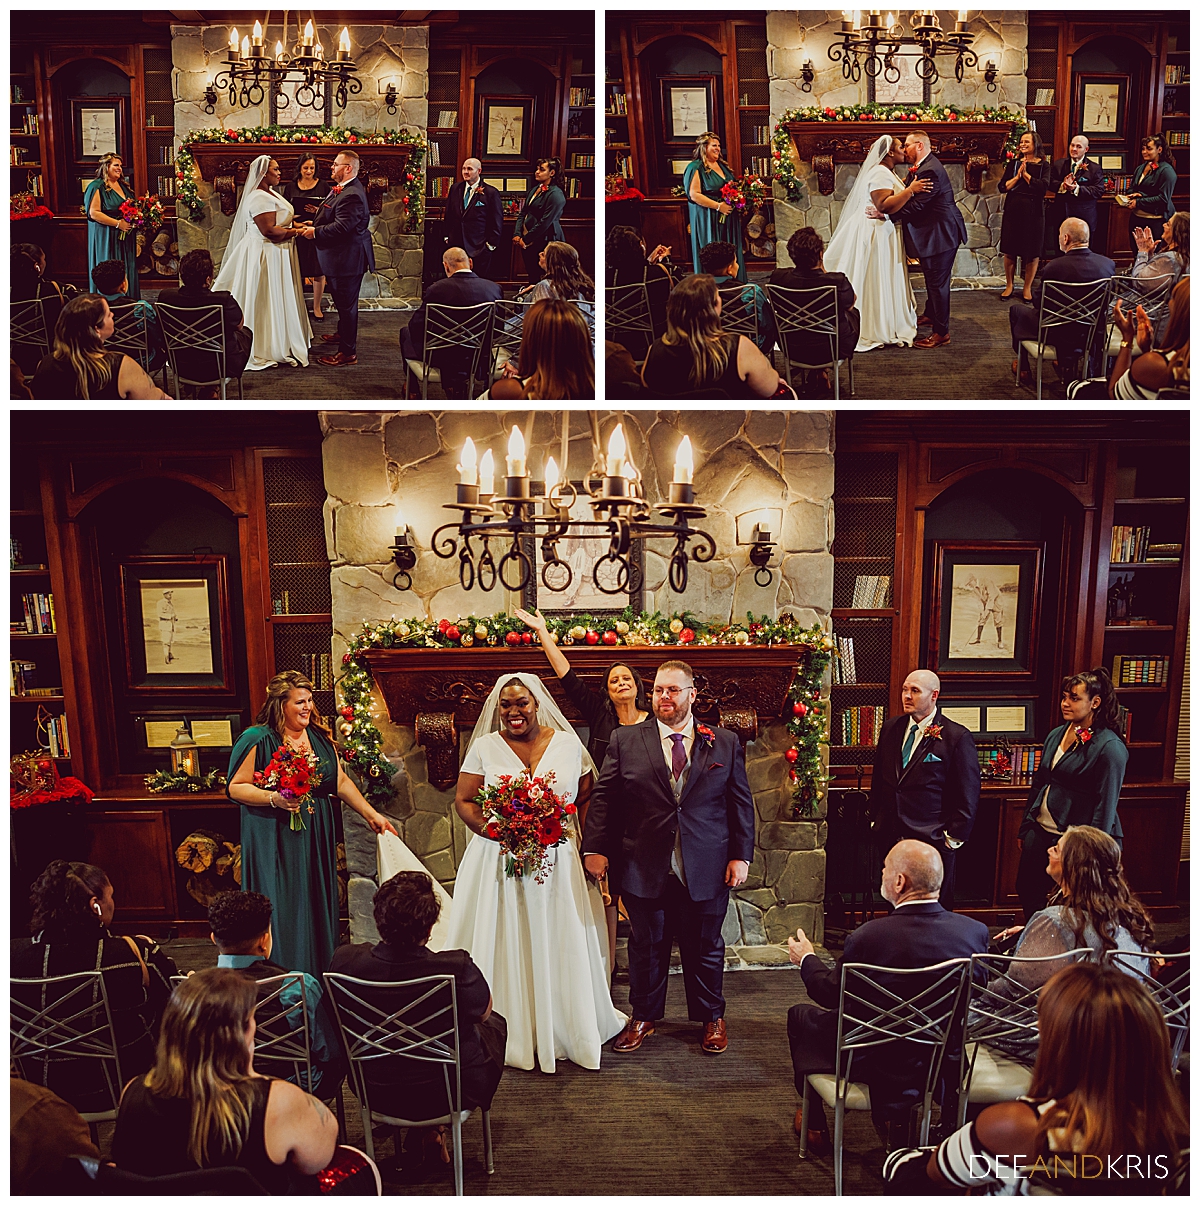 Three images: Top left image of couple looking at each other while guests watch. Top right image of couple's first kiss. Bottom image of new husband and wife greeting guests.